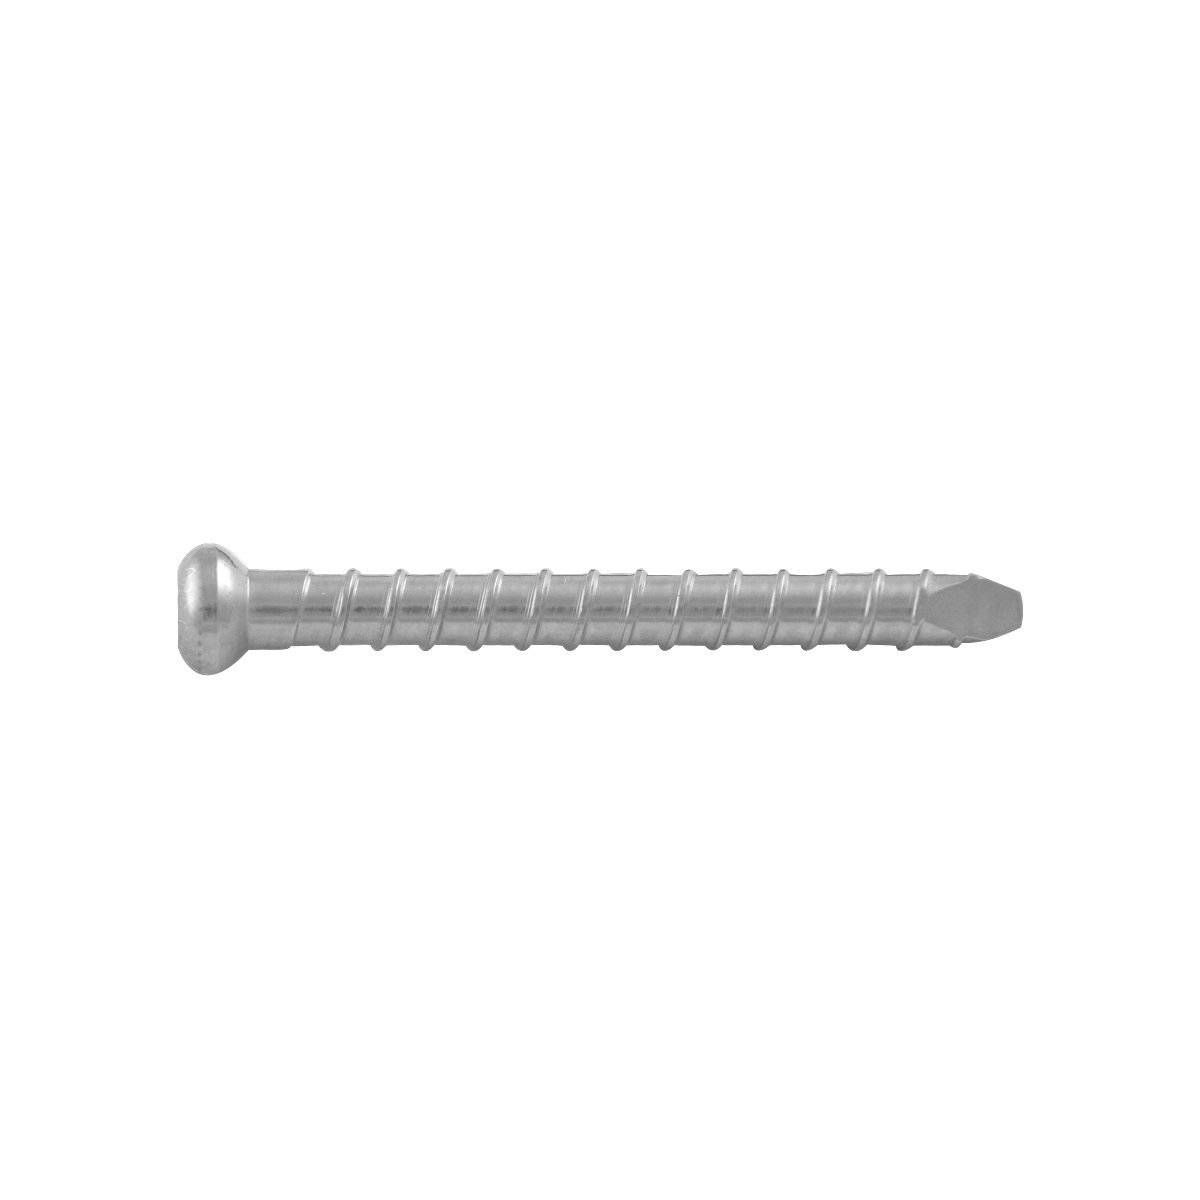 Locking Bolt 4.9mm Self Tapping - S.S.